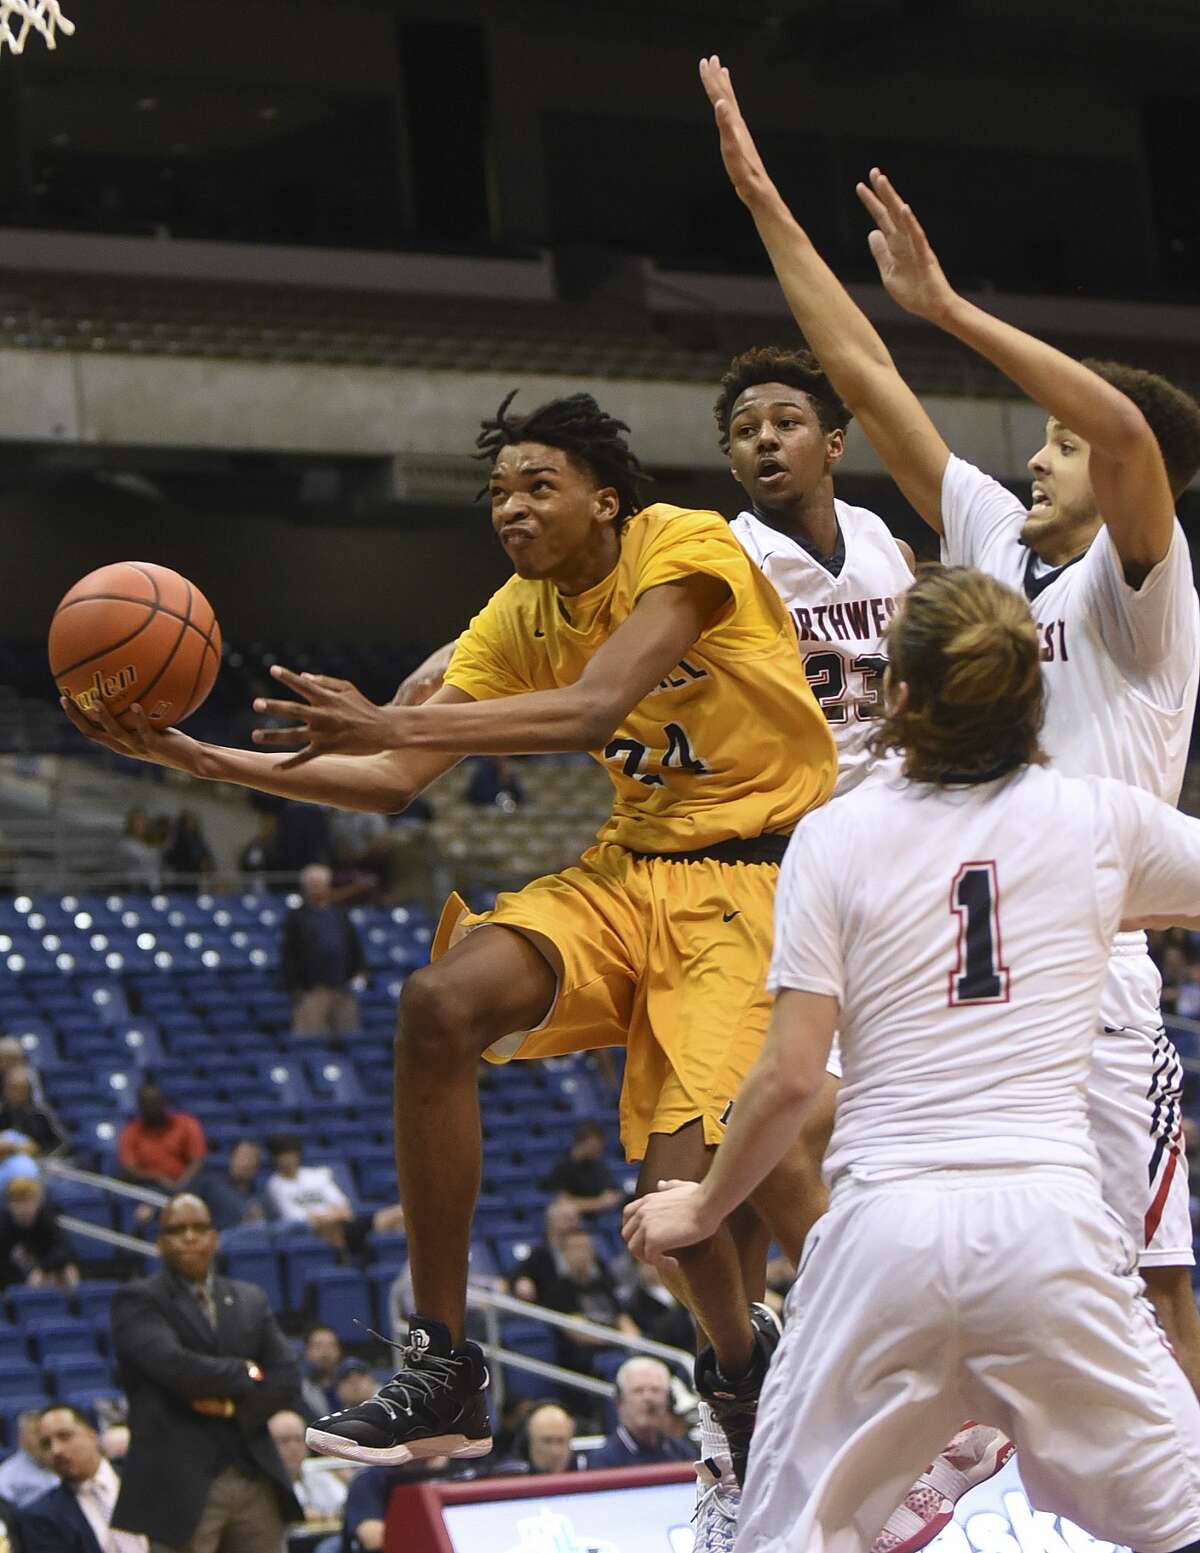 John Walker III of Fort Bend Marshall penetrates the Northwest defense during second-half Class 5A state semifinals action in the Alamodome on Thursday, March 9, 2017.